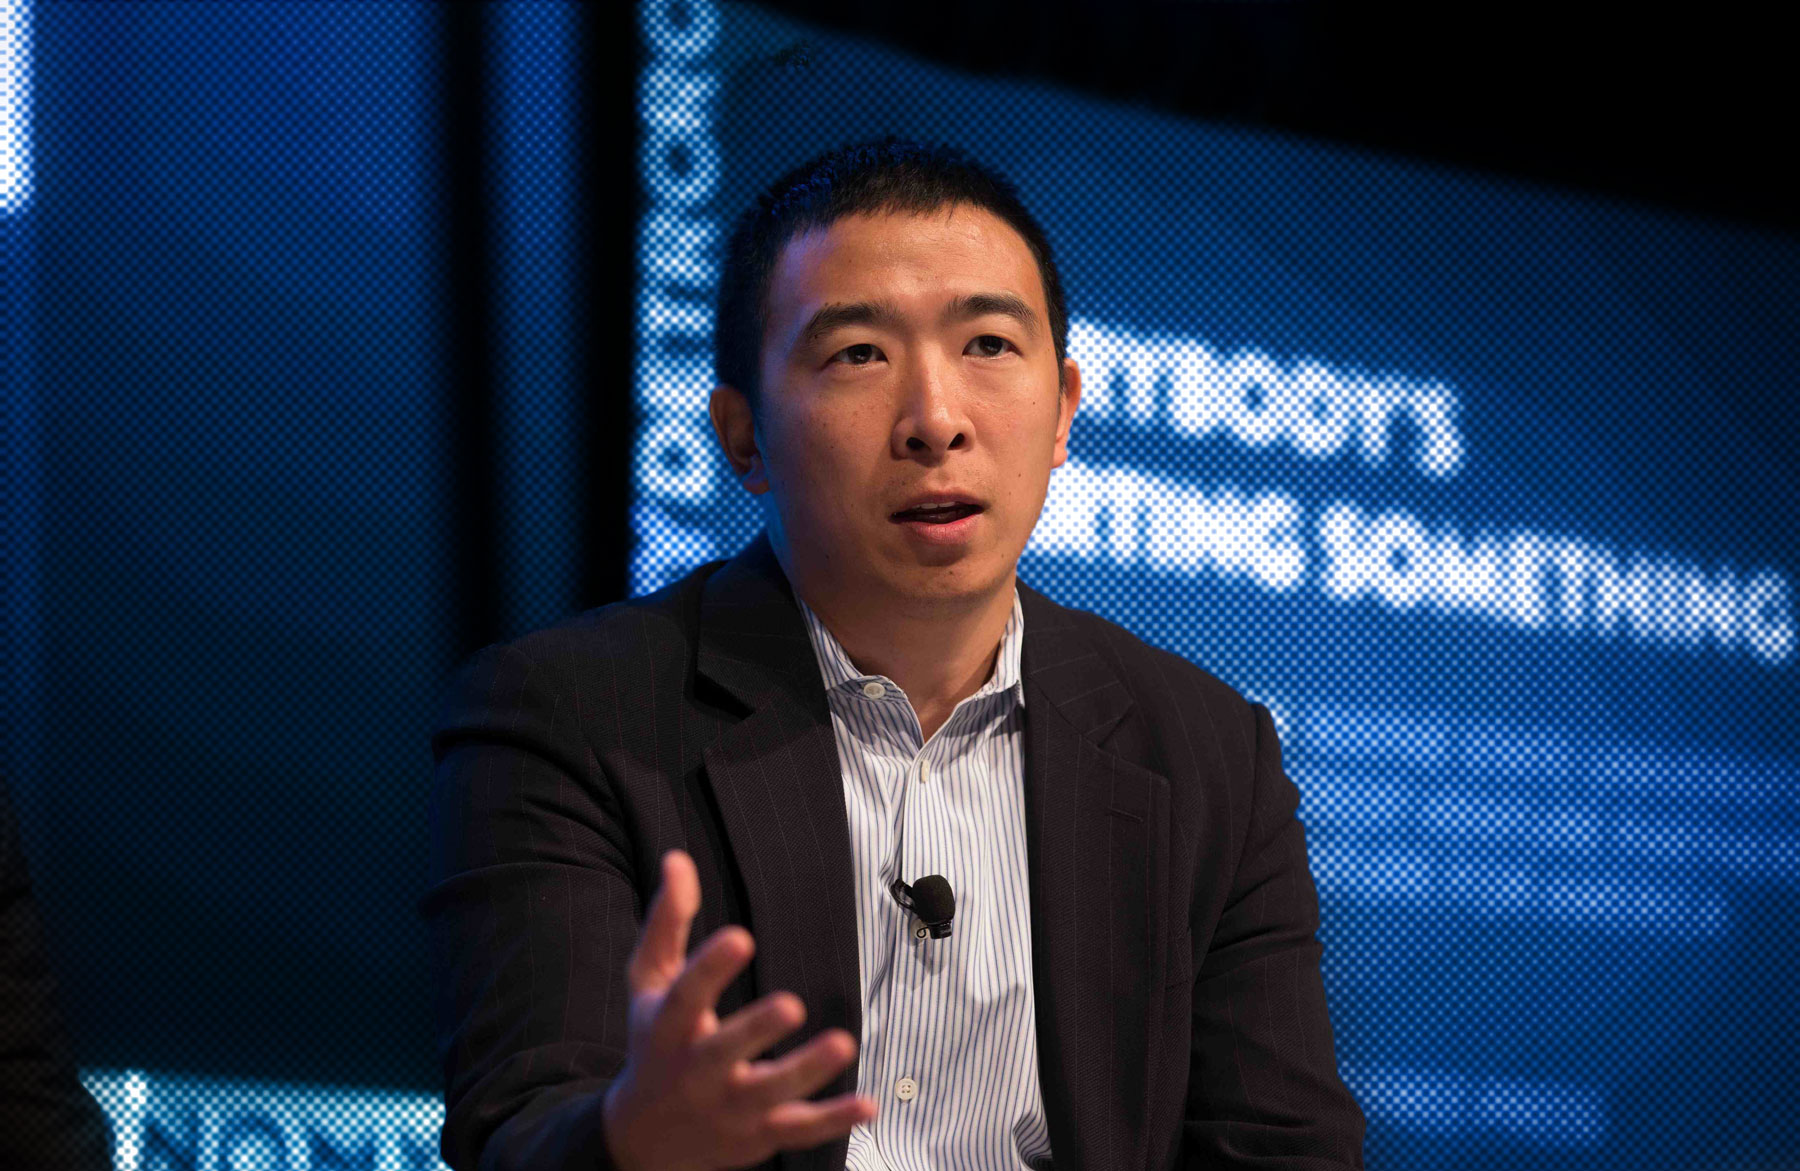 ANDREW YANG WANTS TO REGULATE CRYPTO